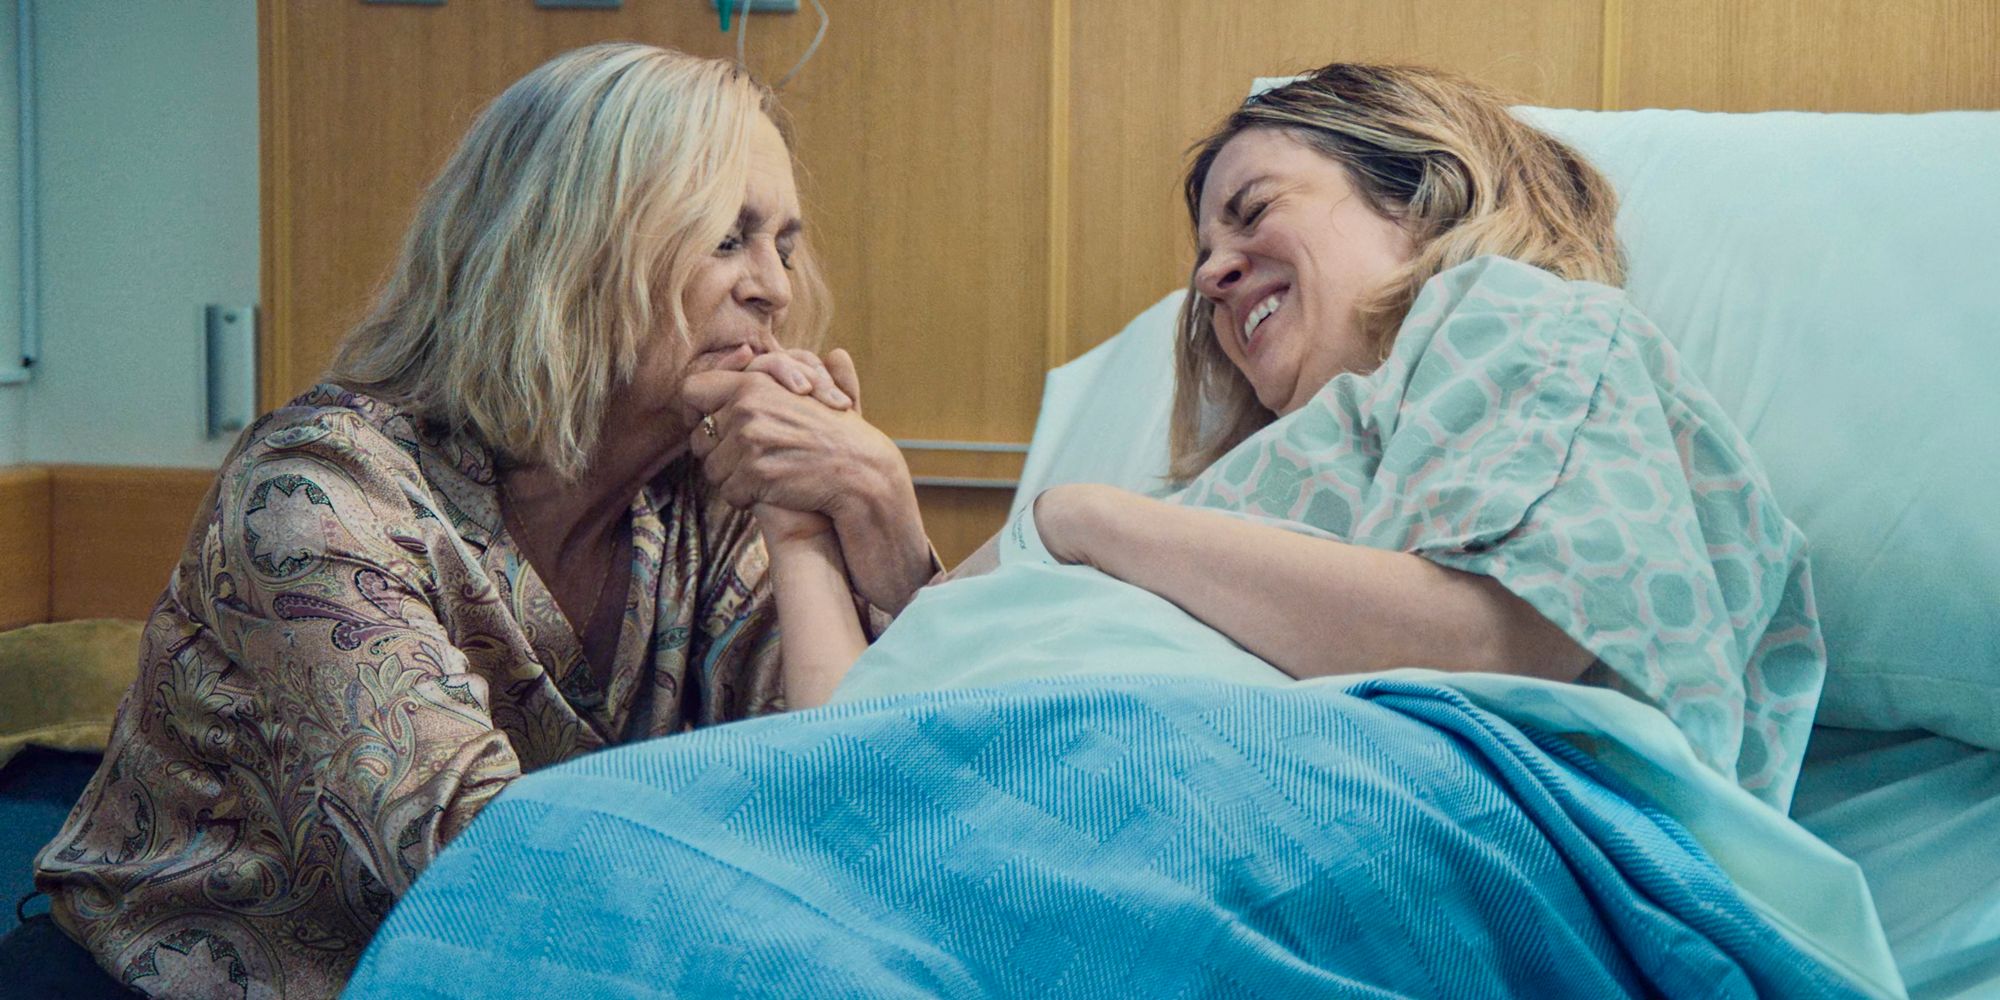 Sugar (Abby Elliott) suffering from contractions while her mother Donna (Jamie Lee Curtis) holds her hand to comfort her in The Bear Season 3 Episode 8